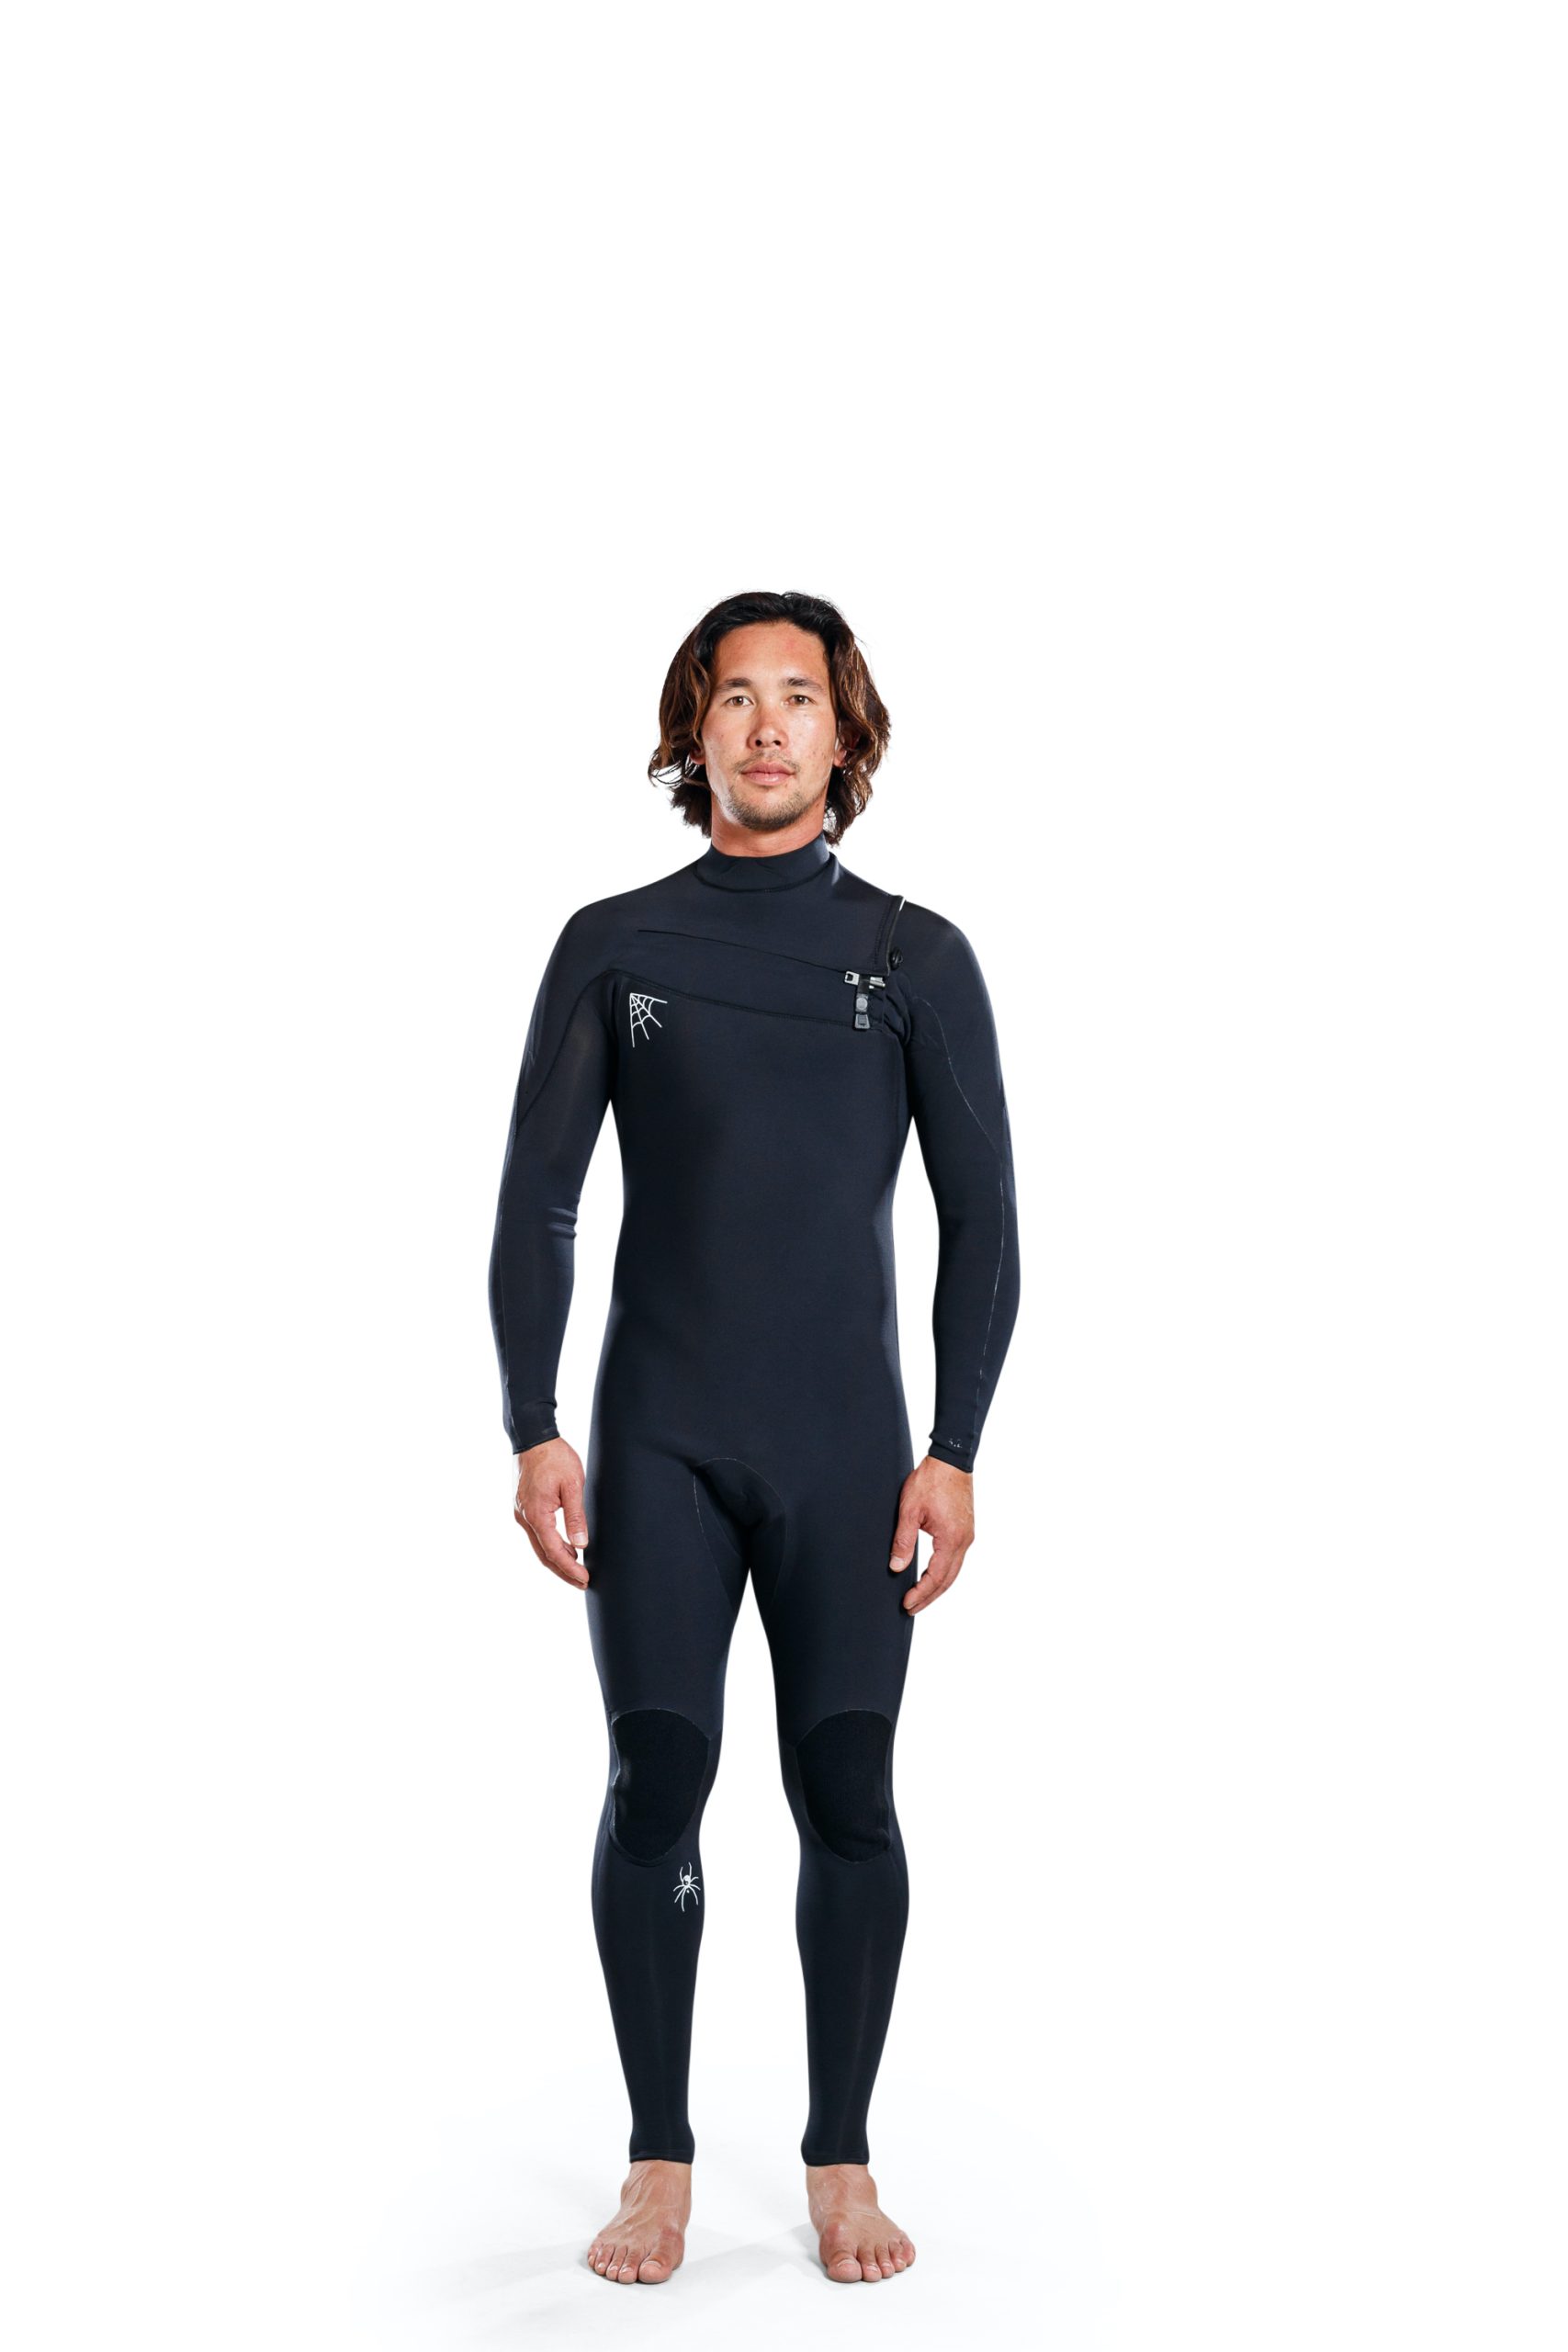 Adelio S/S 22 Wetsuits Preview